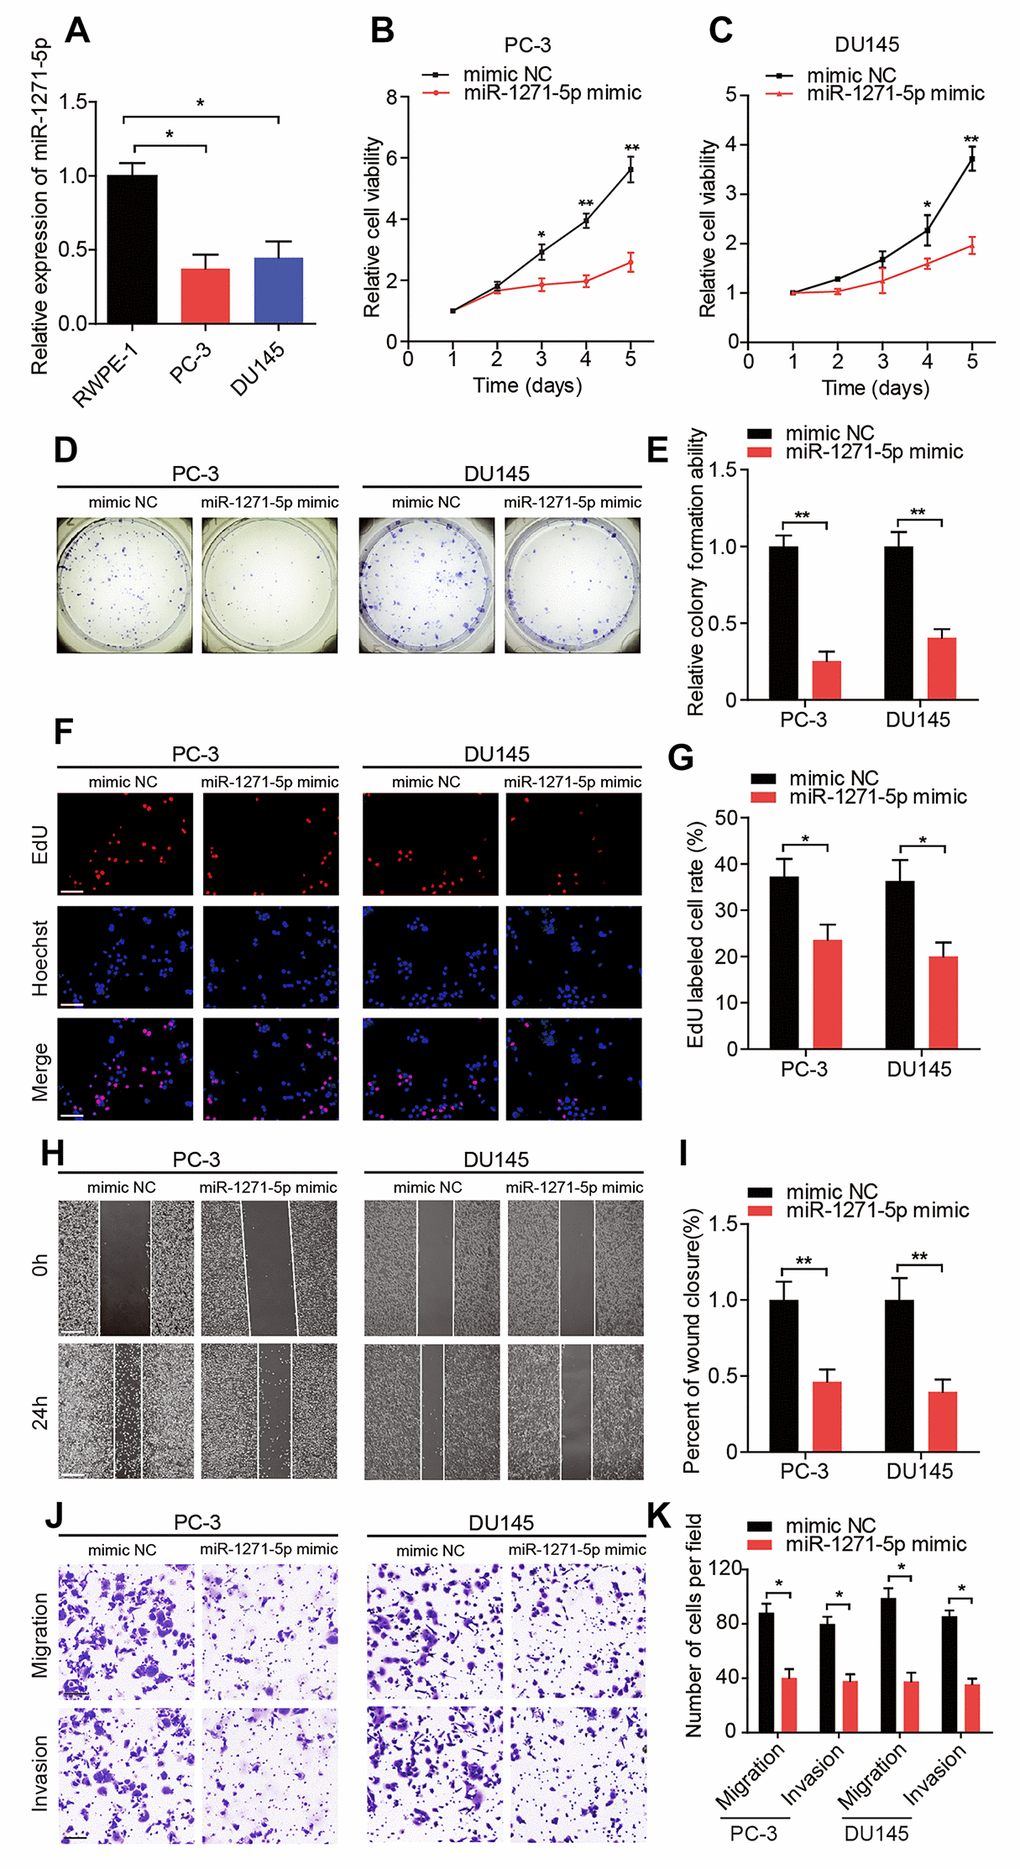 miR-1271-5p functions as a tumor suppressor in vitro. (A) qRT-PCR analysis of miR-1271-5p expression in RWPE-1, PC-3, and DU145 cells. (B, C) CCK-8 assay determined the cell viability in PC-3 and DU145 cells treated with miR-1271-5p mimic. (D, E) Representative images and quantification of colony formation assays in PC-3 and DU145 cells treated with miR-1271-5p mimic. (F, G) Representative images and quantification of EdU assays in PC-3 and DU145 cells treated with miR-1271-5p mimic. Scale bars: 100 μm. (H, I) Representative images and quantification of wound healing assays in PC-3 and DU145 cells treated with miR-1271-5p mimic. Scale bars: 200 μm. (J, K) Representative images and quantifications of transwell assays in PC-3 and DU145 cells treated with miR-1271-5p mimic. Scale bars: 100 μm. Data are displayed as mean ± SD. *p p 